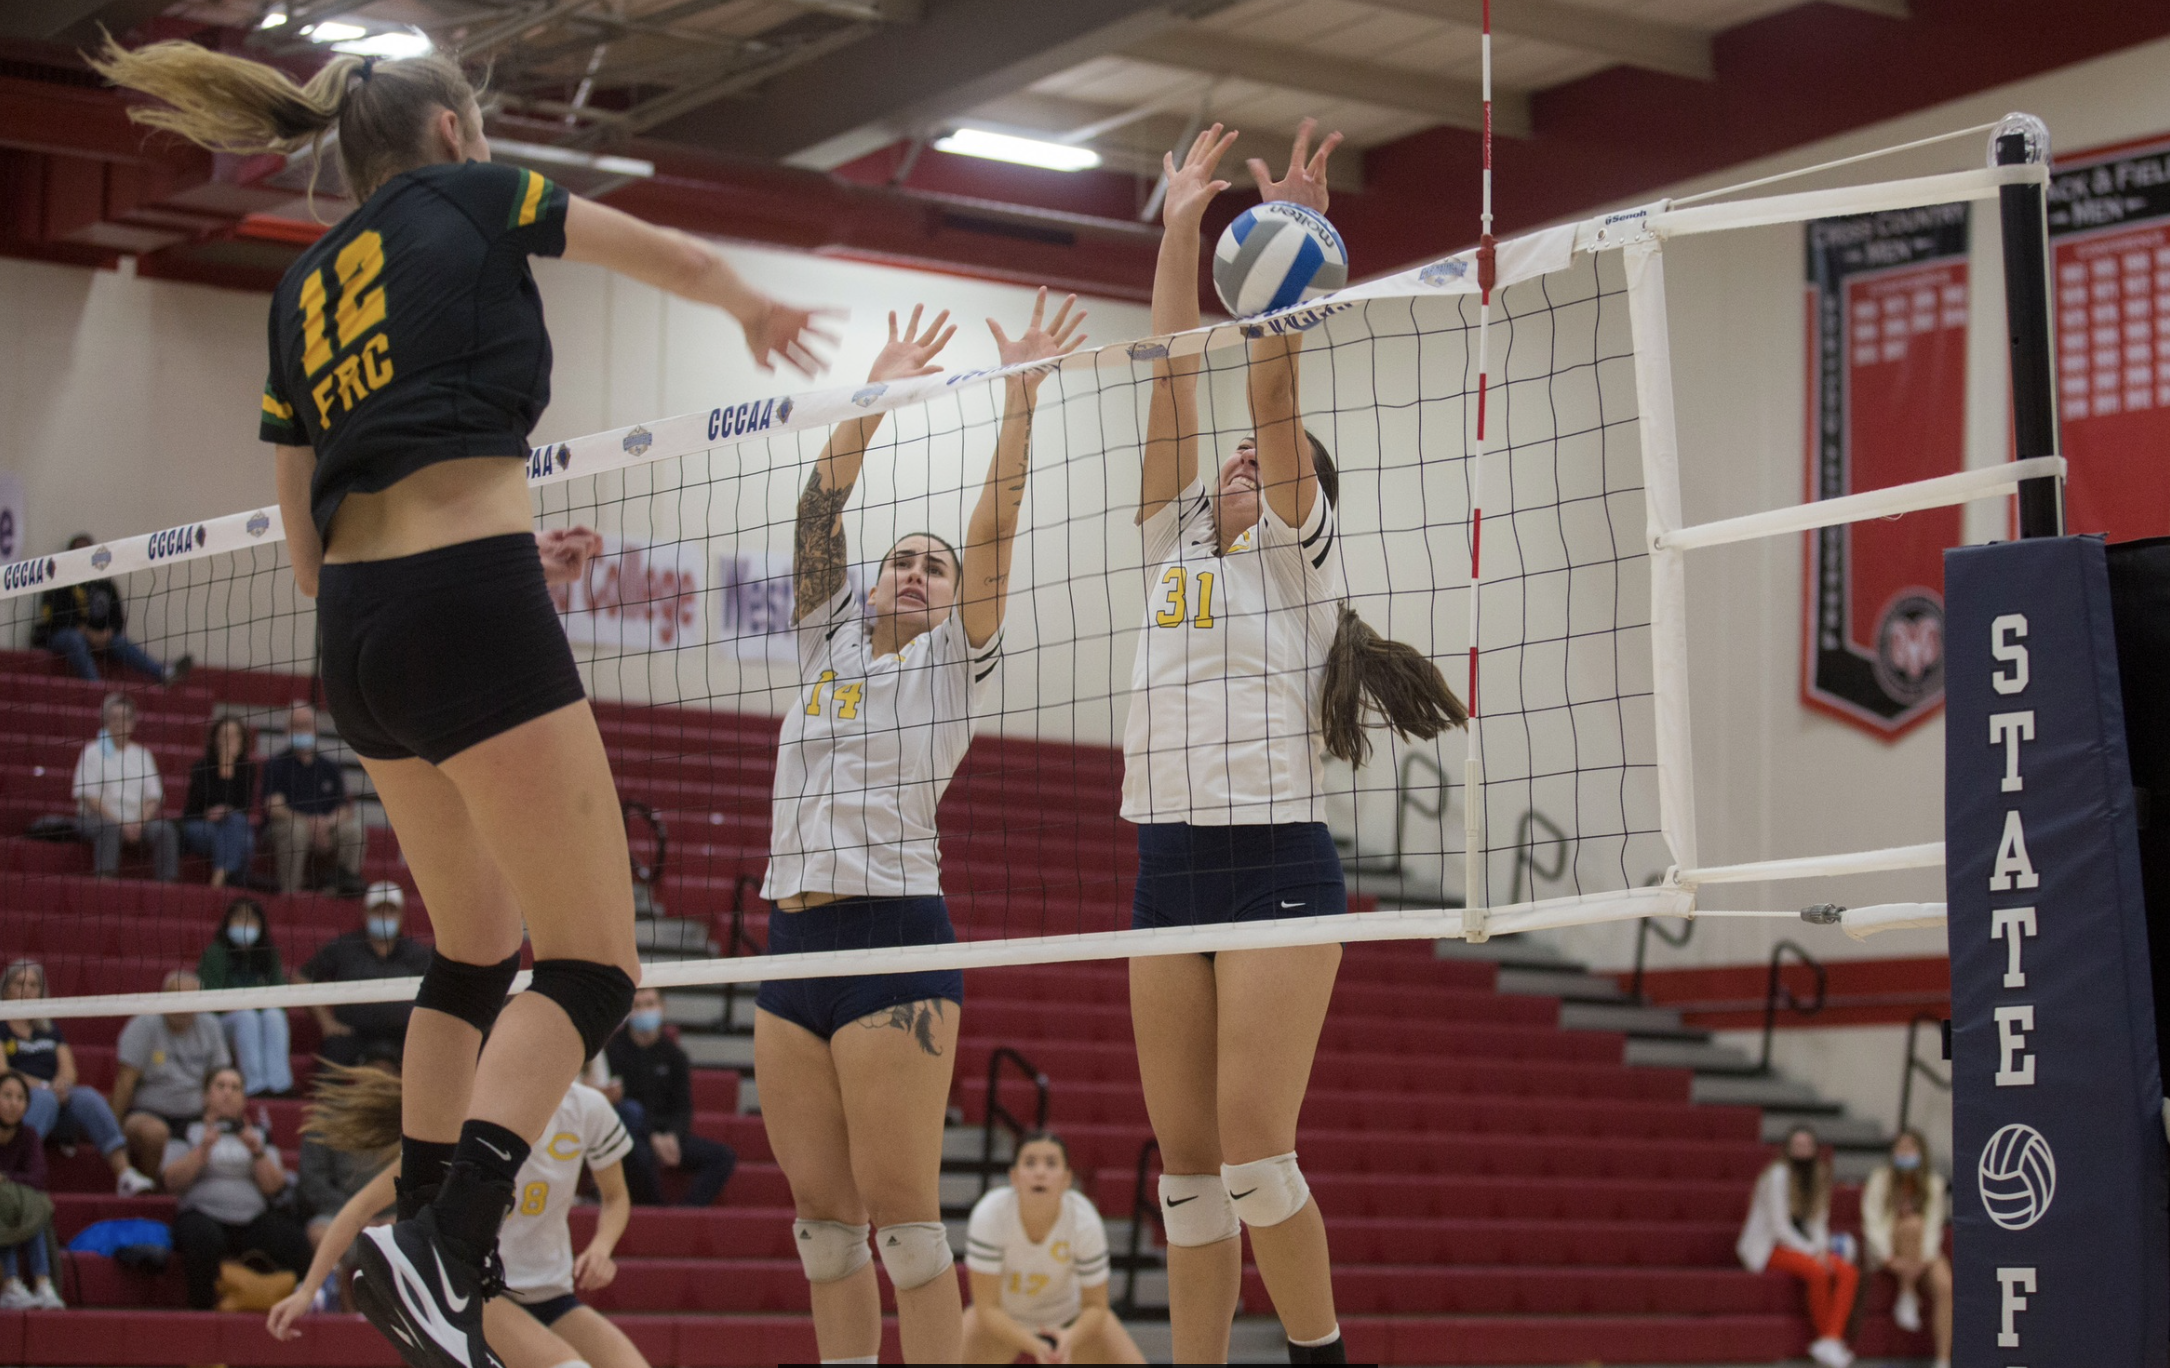 College of the Canyons women's volleyball vs. Feather River College at the 2021 CCCAA State Championship Tourney.